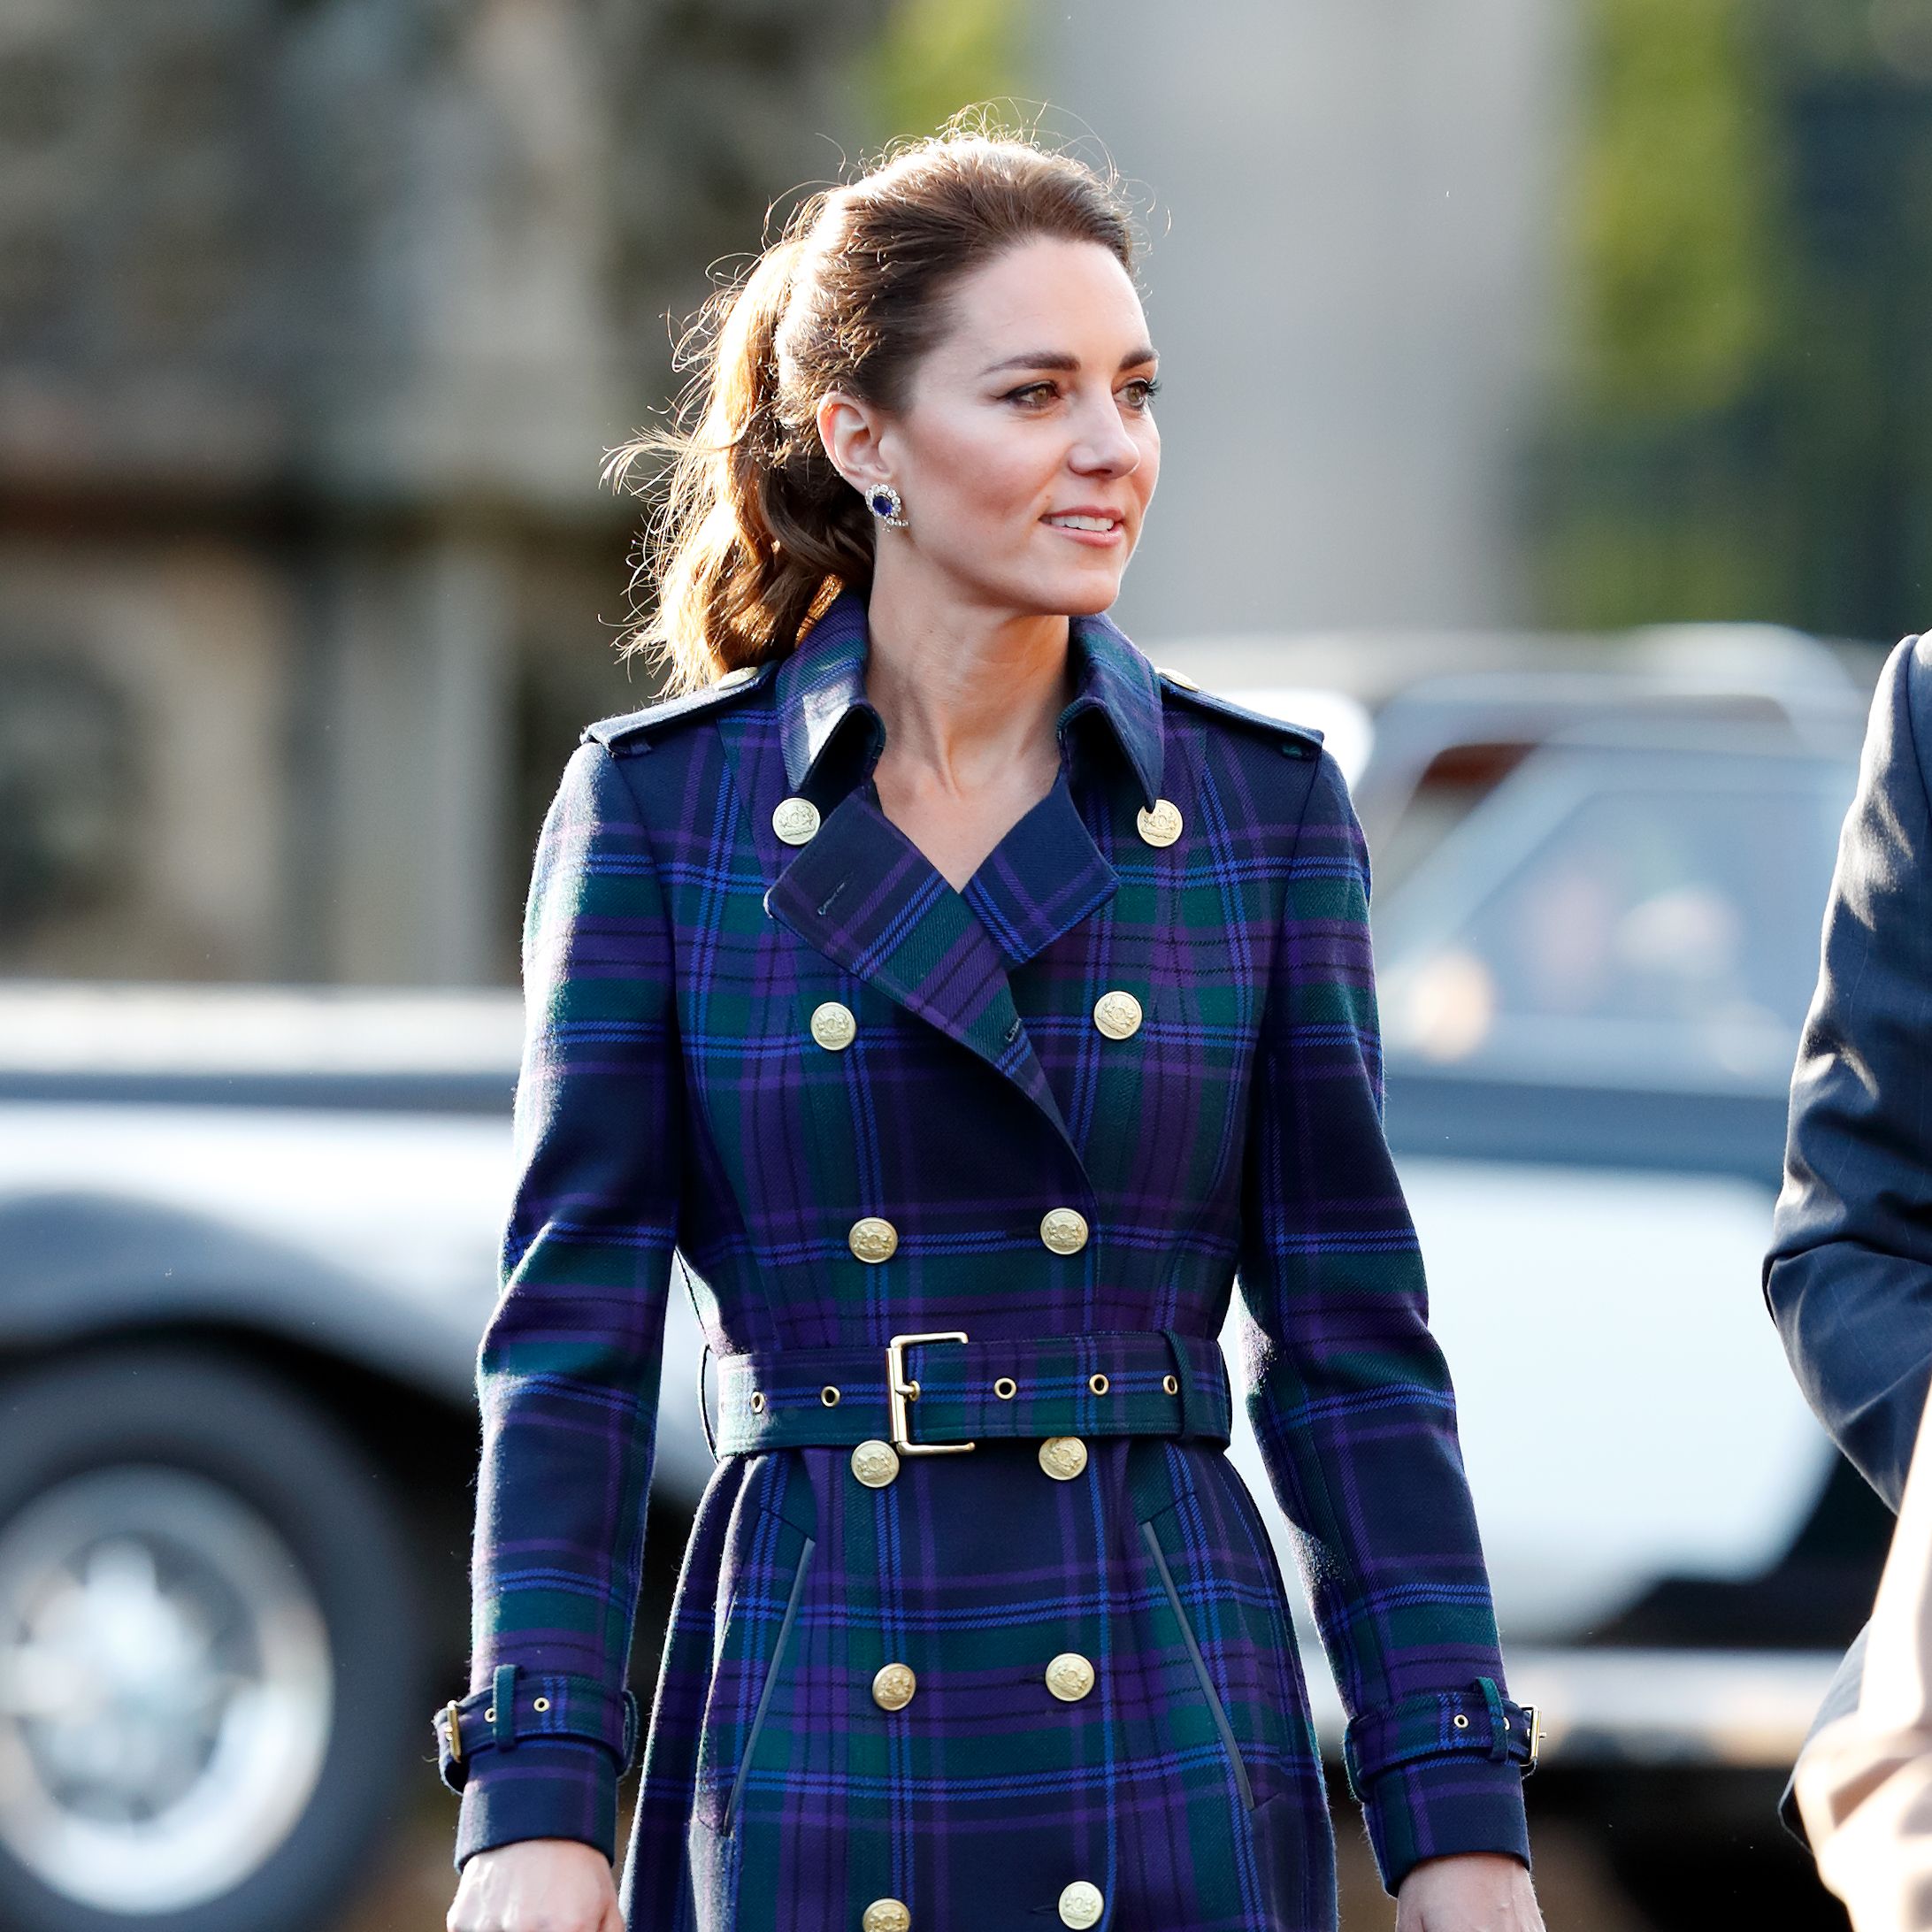 Expert Says Kate Middleton's Body Language Shows a 